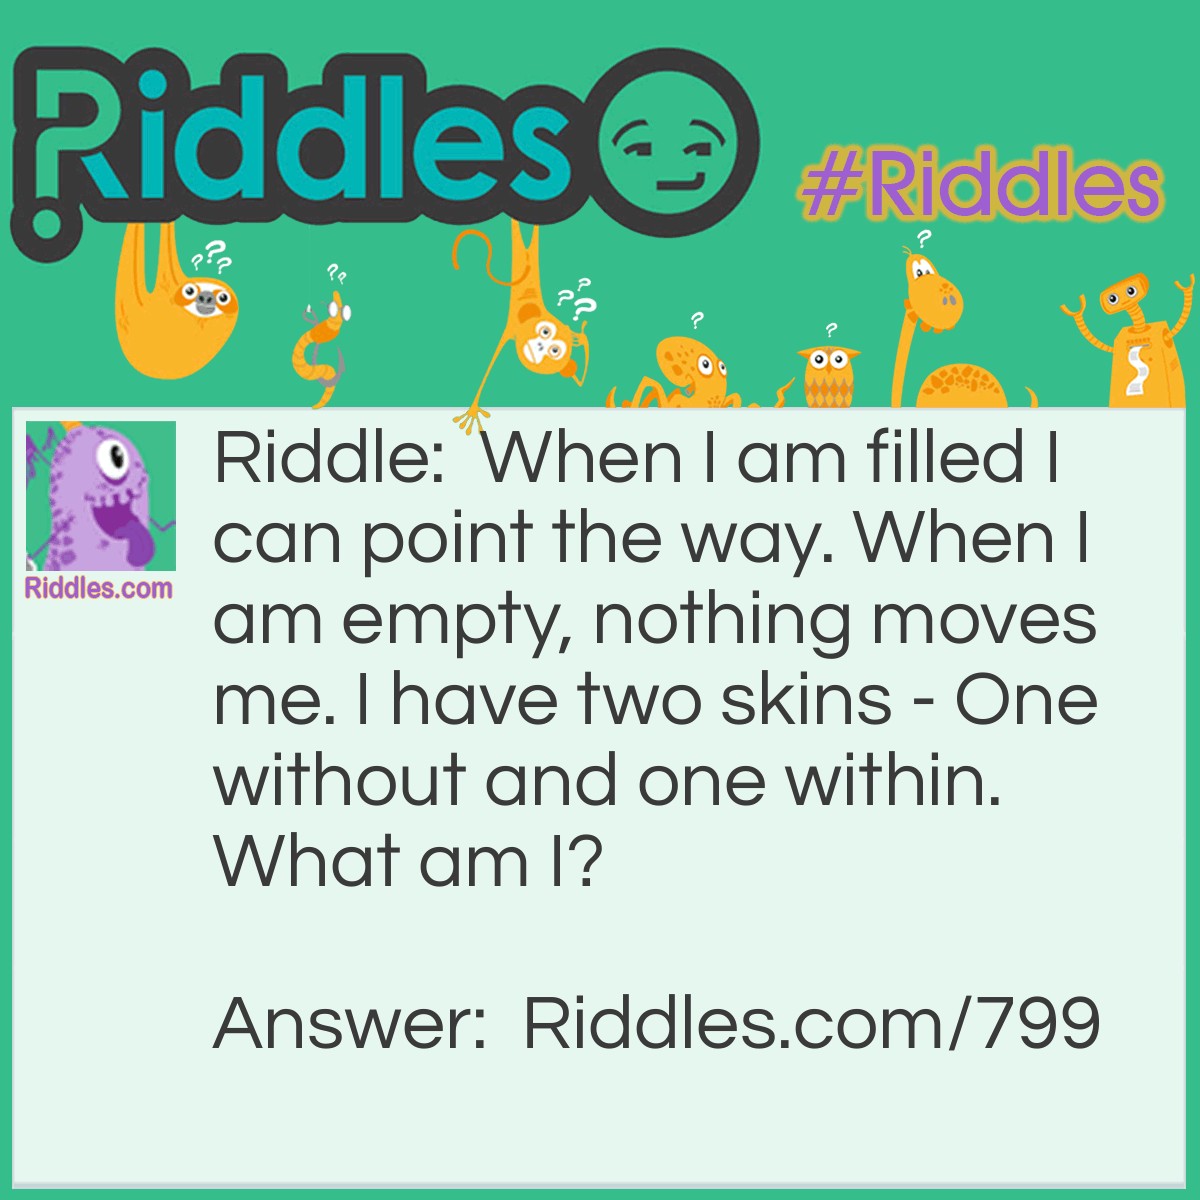 Riddle: When I am filled I can point the way. When I am empty, nothing moves me. I have two skins - One without and one within.
What am I? Answer: A glove!